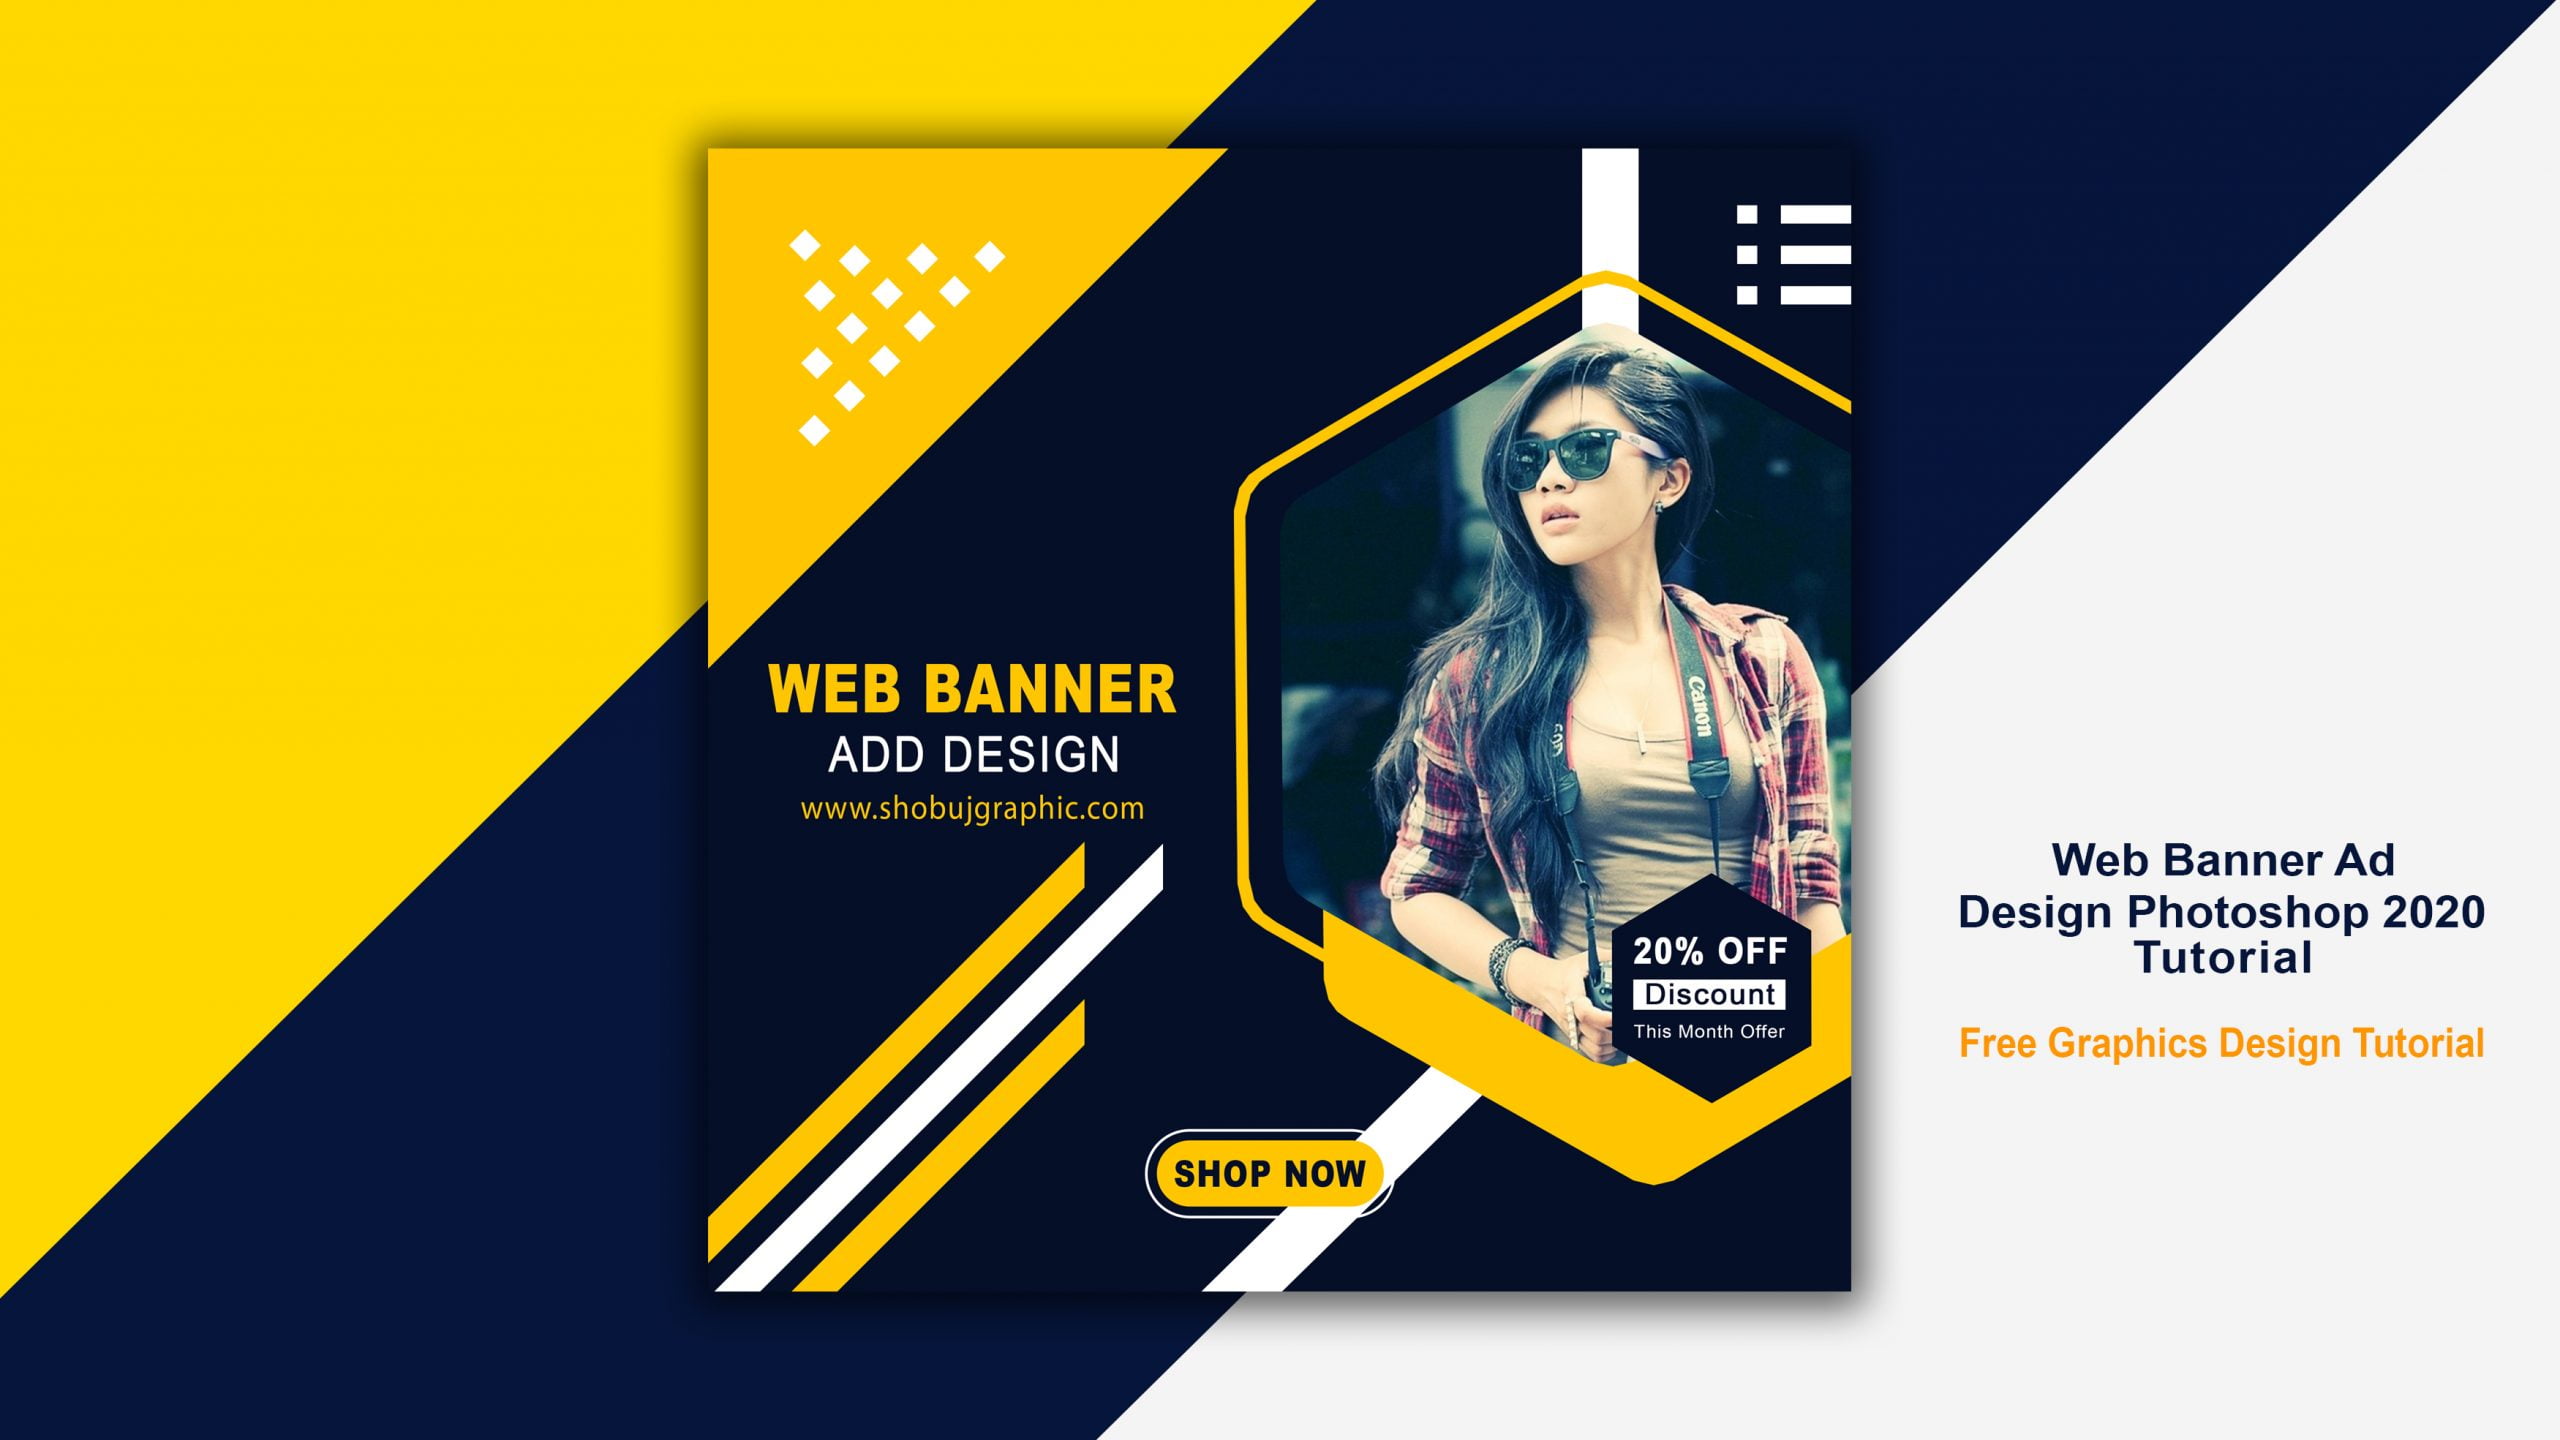 Event Banner Template